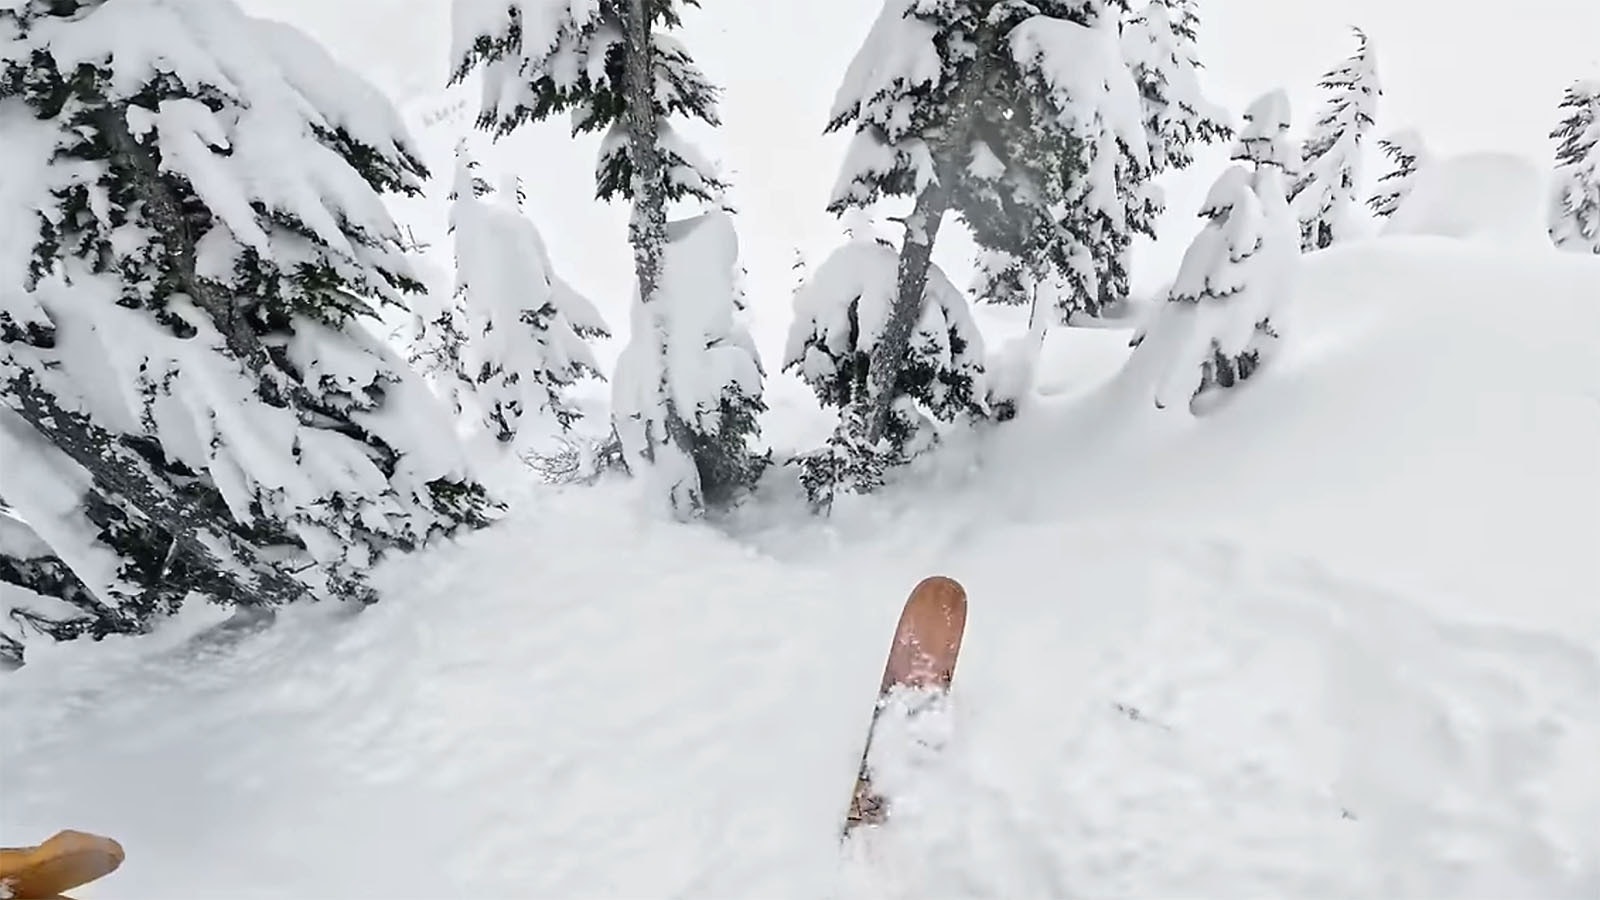 In a dramatic GoPro video, a Washington state skier makes his way through a stand of trees in the backcountry, with deep wells of snow around them.